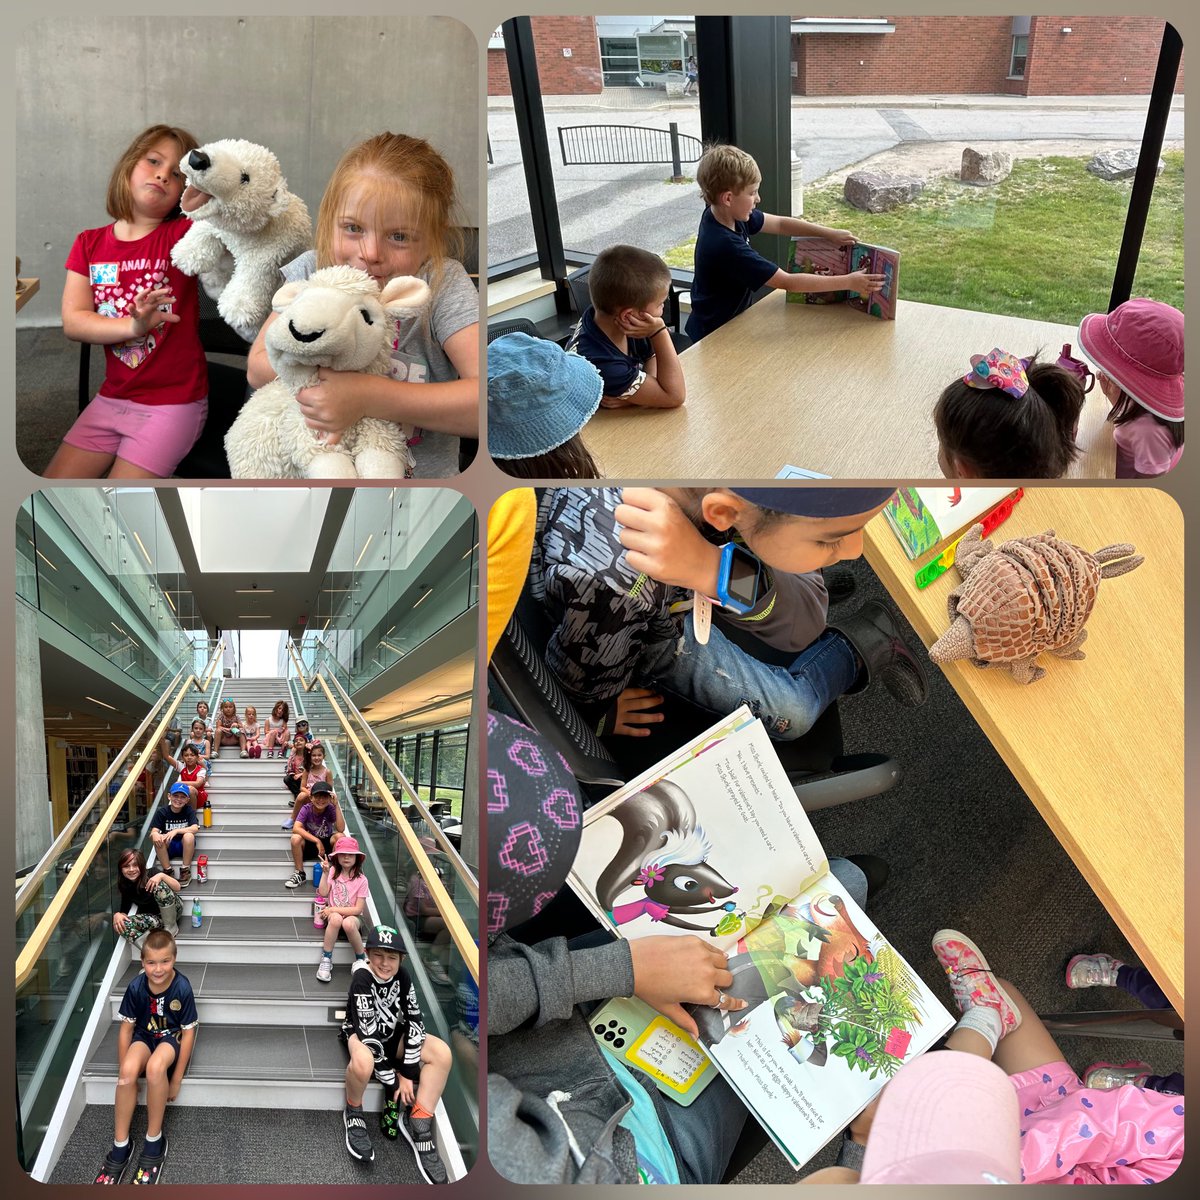 Campers love visiting the Harris Learning Library! Beautiful space to learn and explore. 
#AnimalKingdomCamp
#NipissingUniversity
#YouthCamps